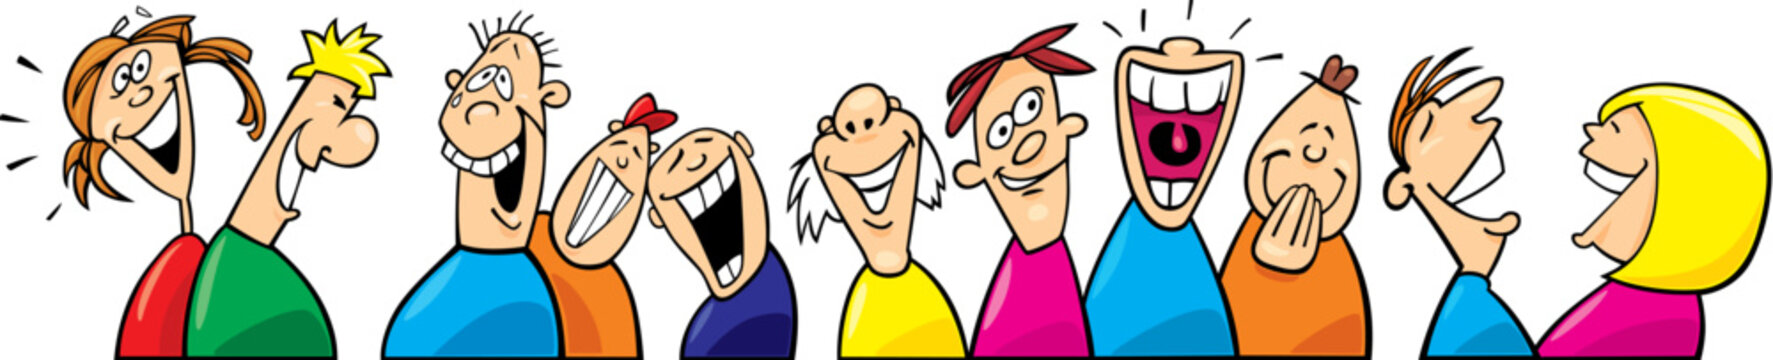 Cartoon vector illustration of laughing people